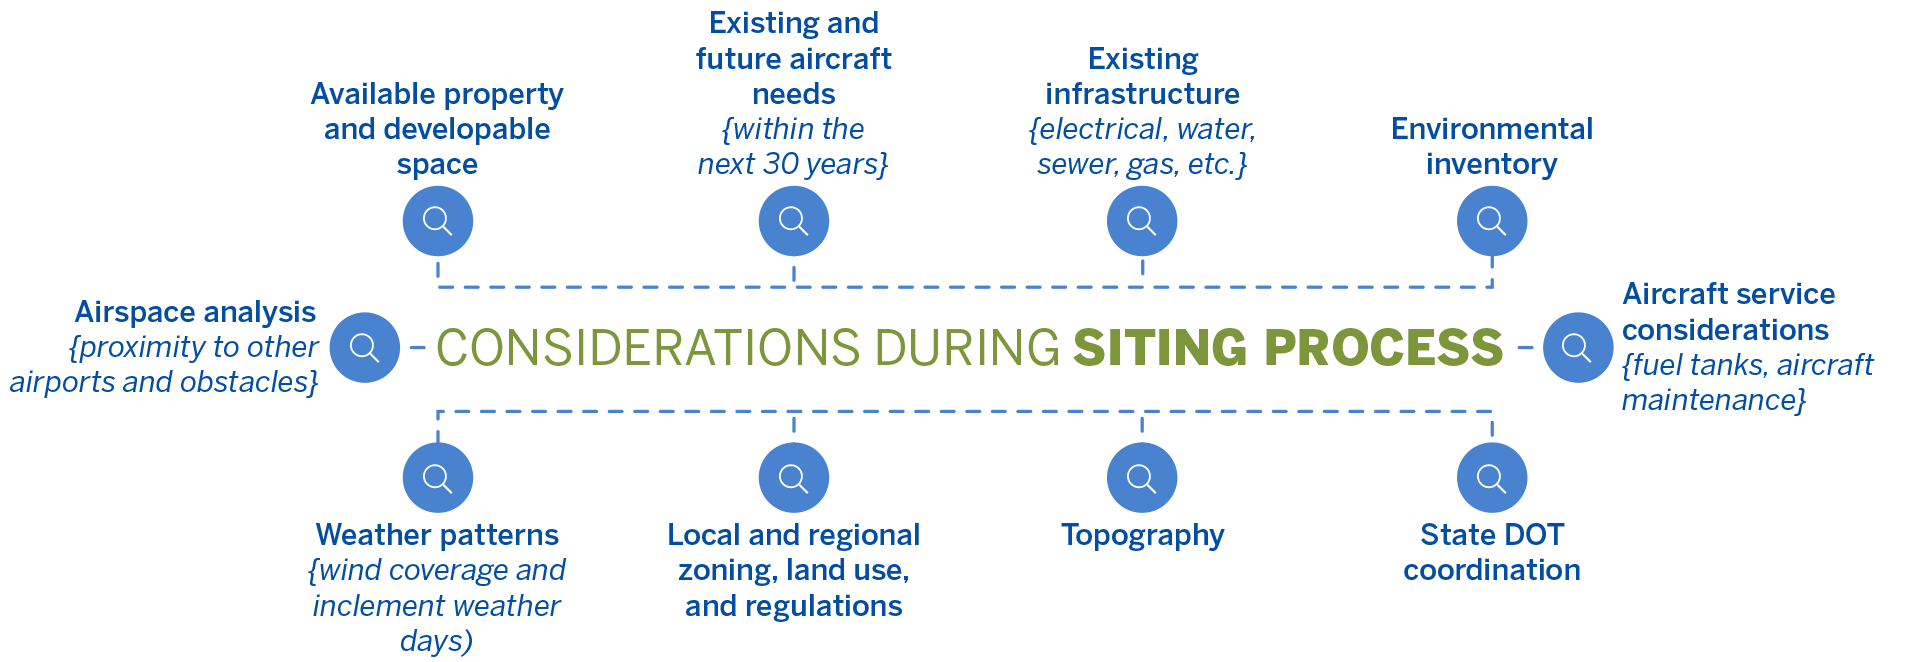 Considerations during siting process graphic